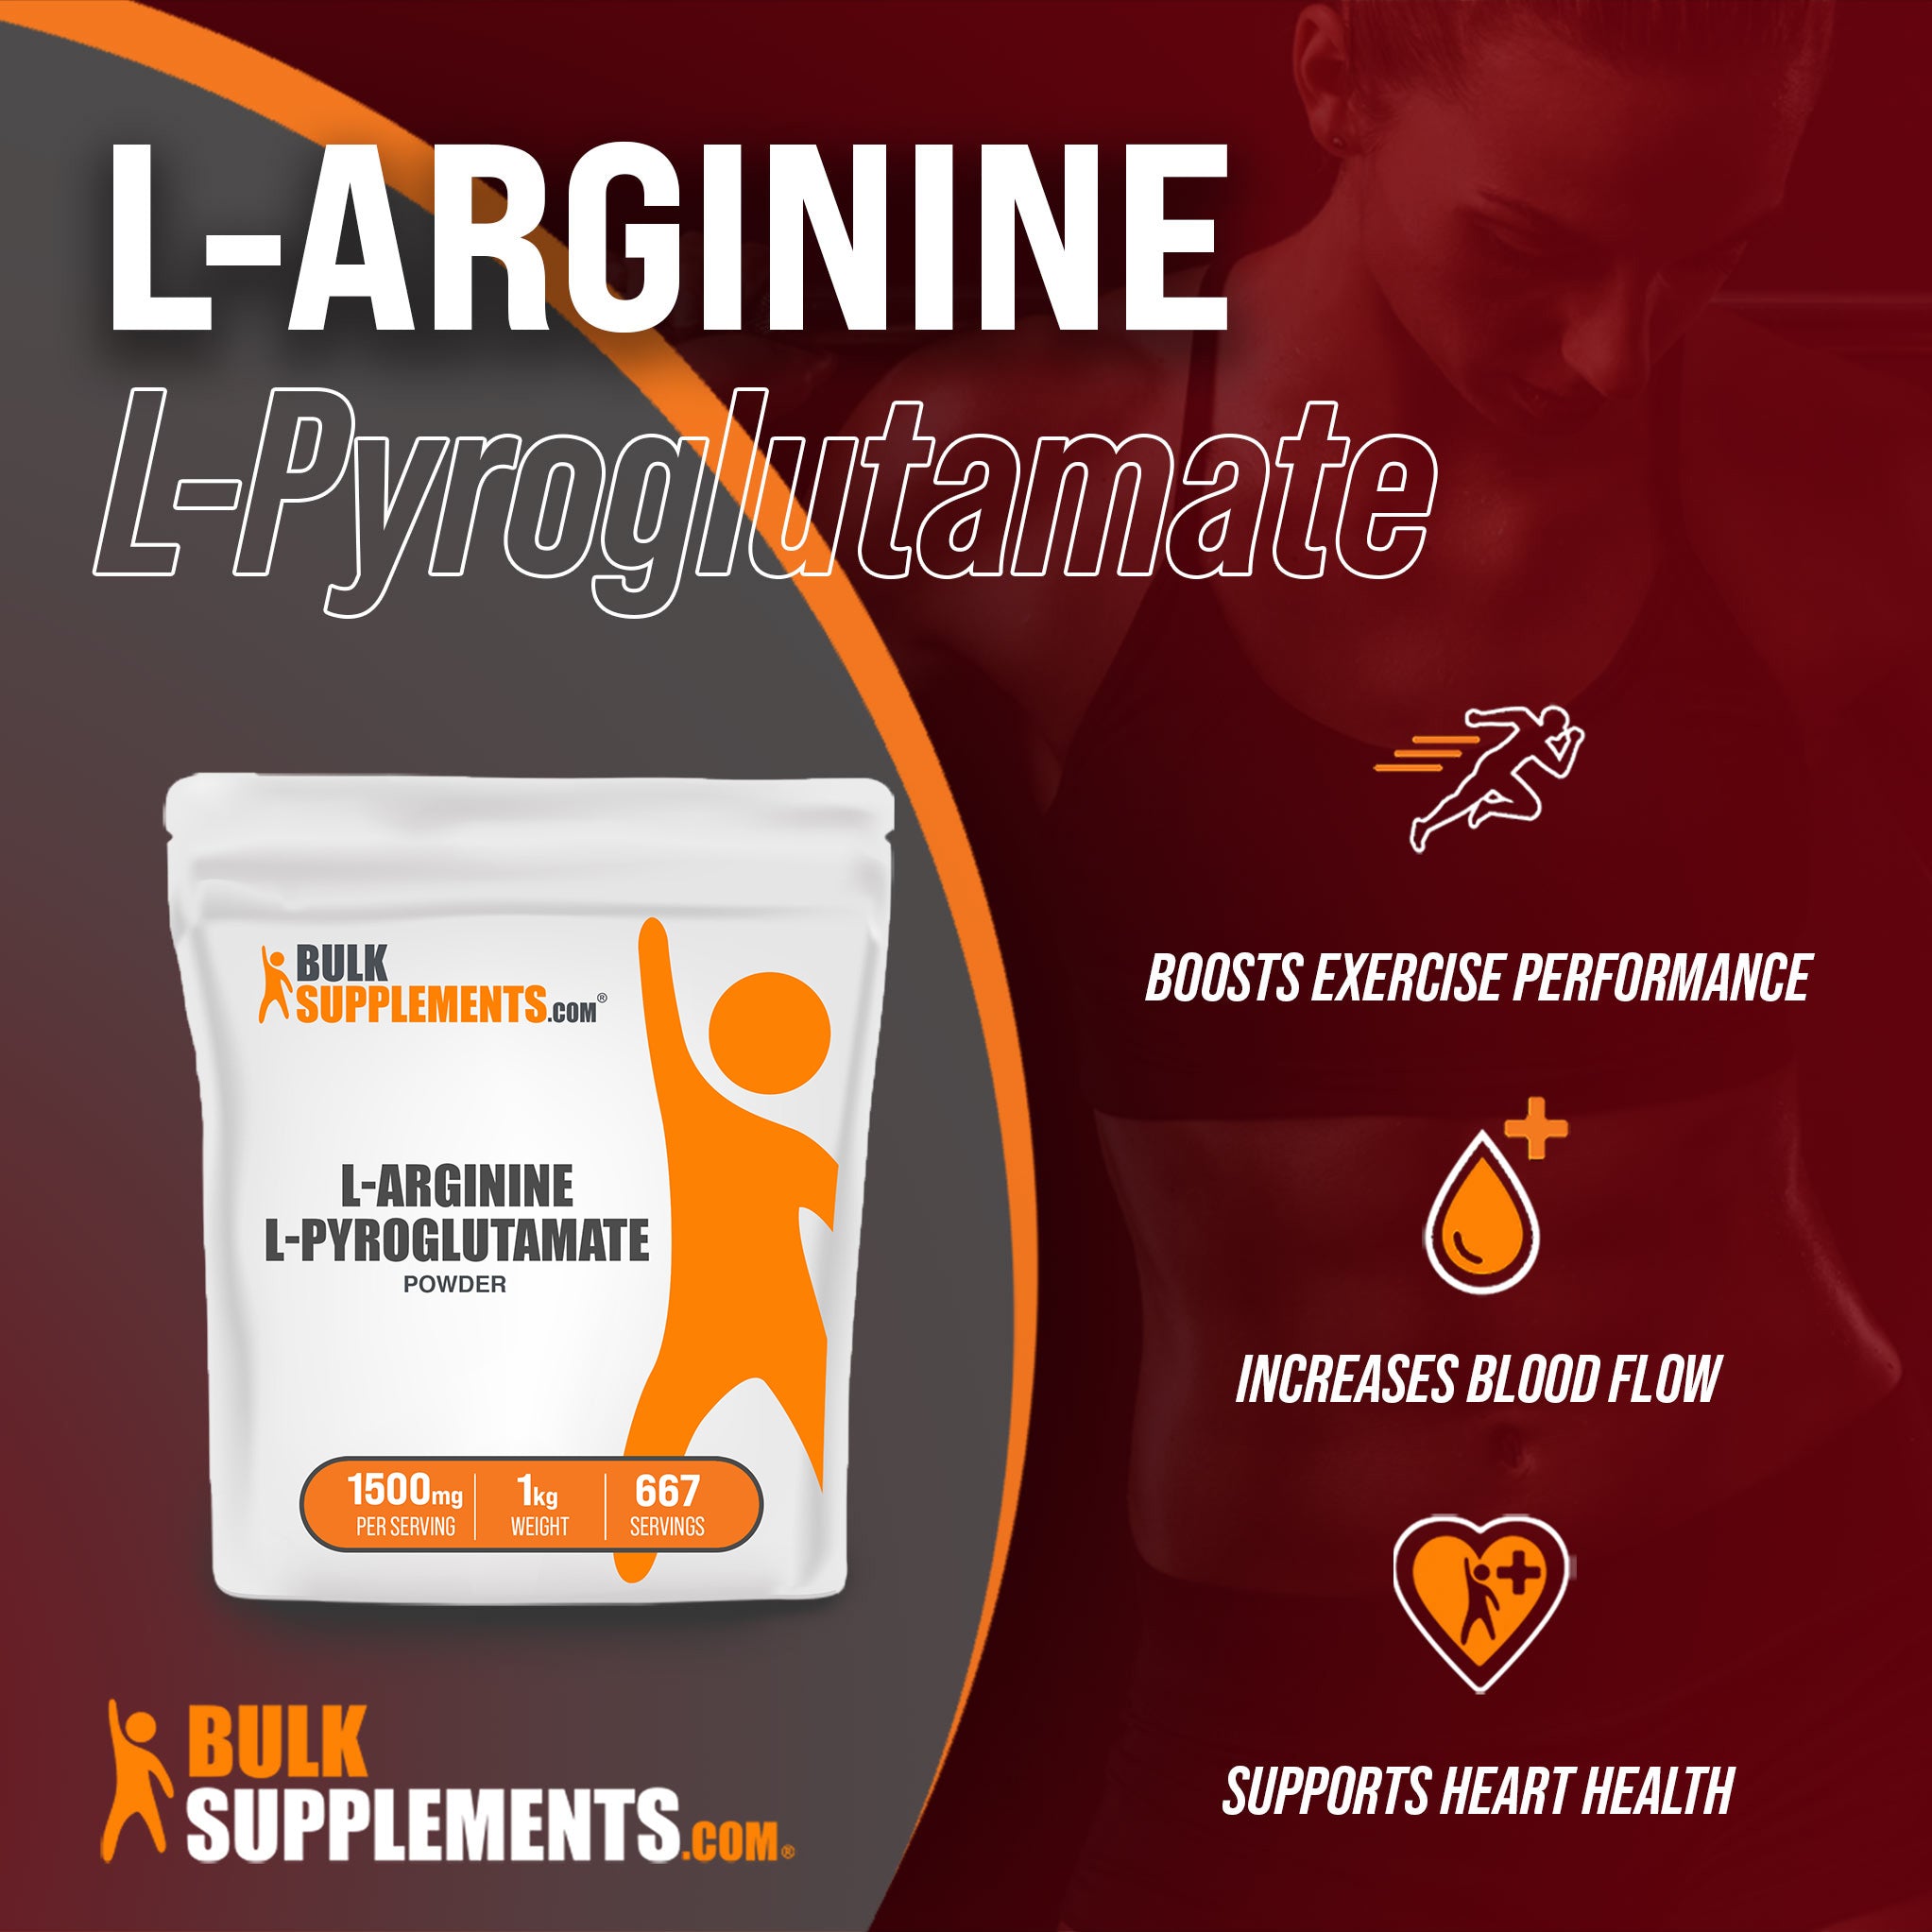 Benefits of L-Arginine L-Pyroglutamate: boosts exercise performance, increases blood flow, supports heart health